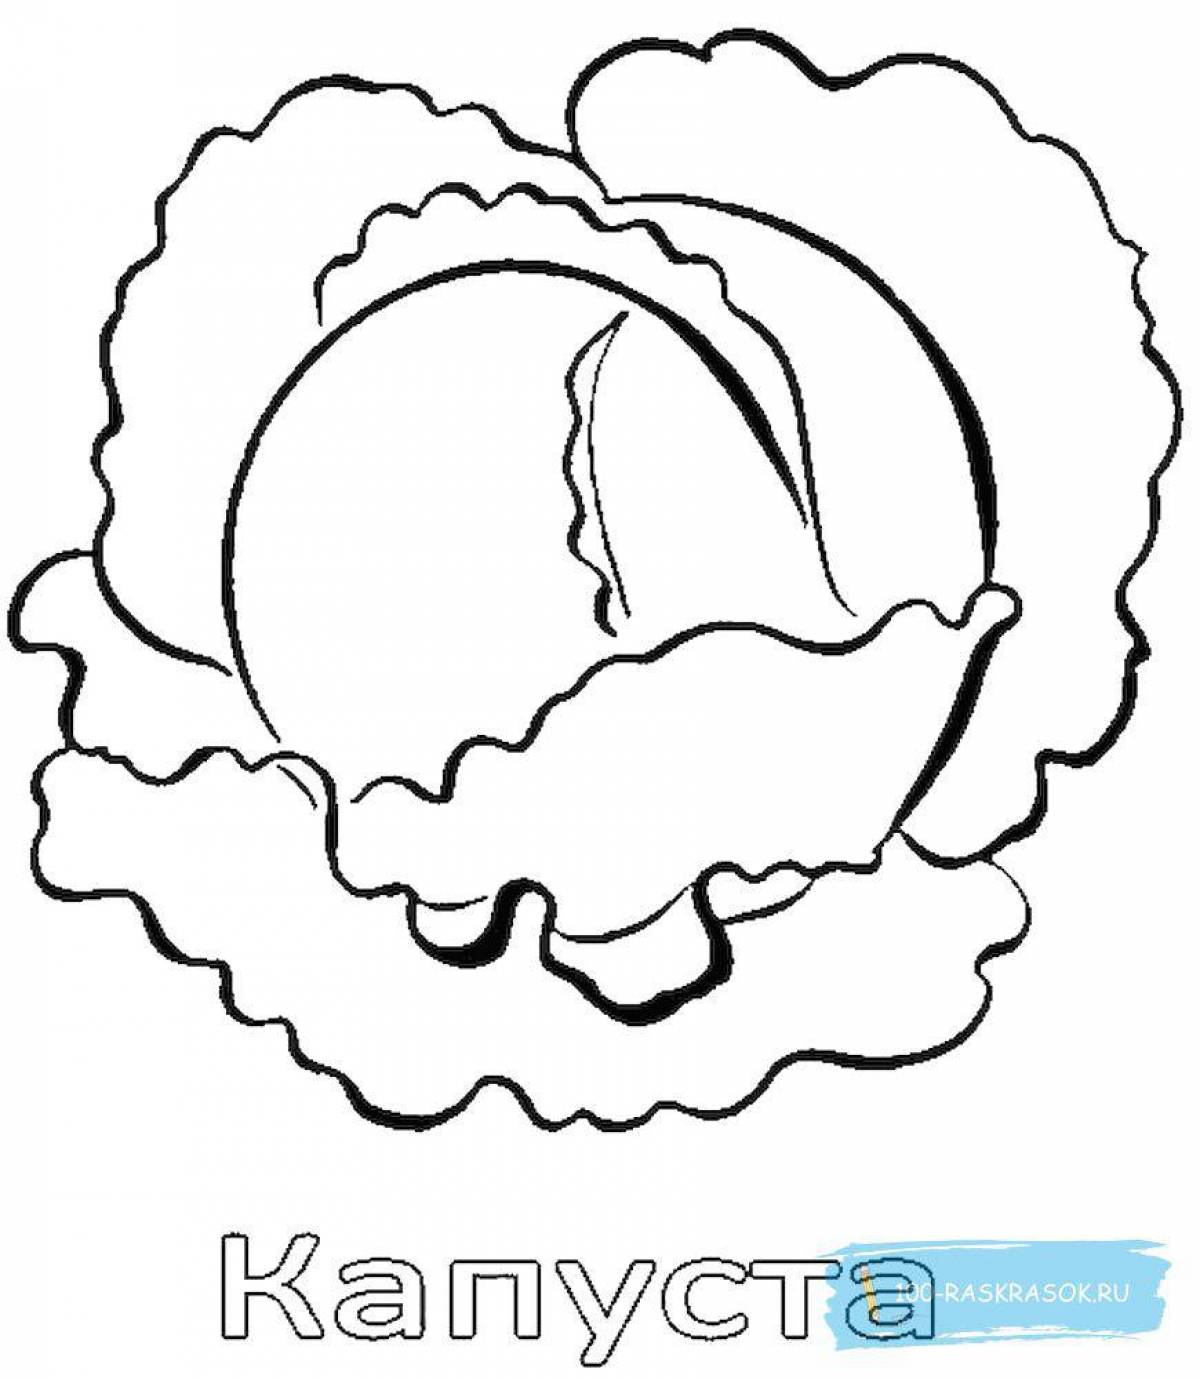 Playful cabbage coloring page for kids